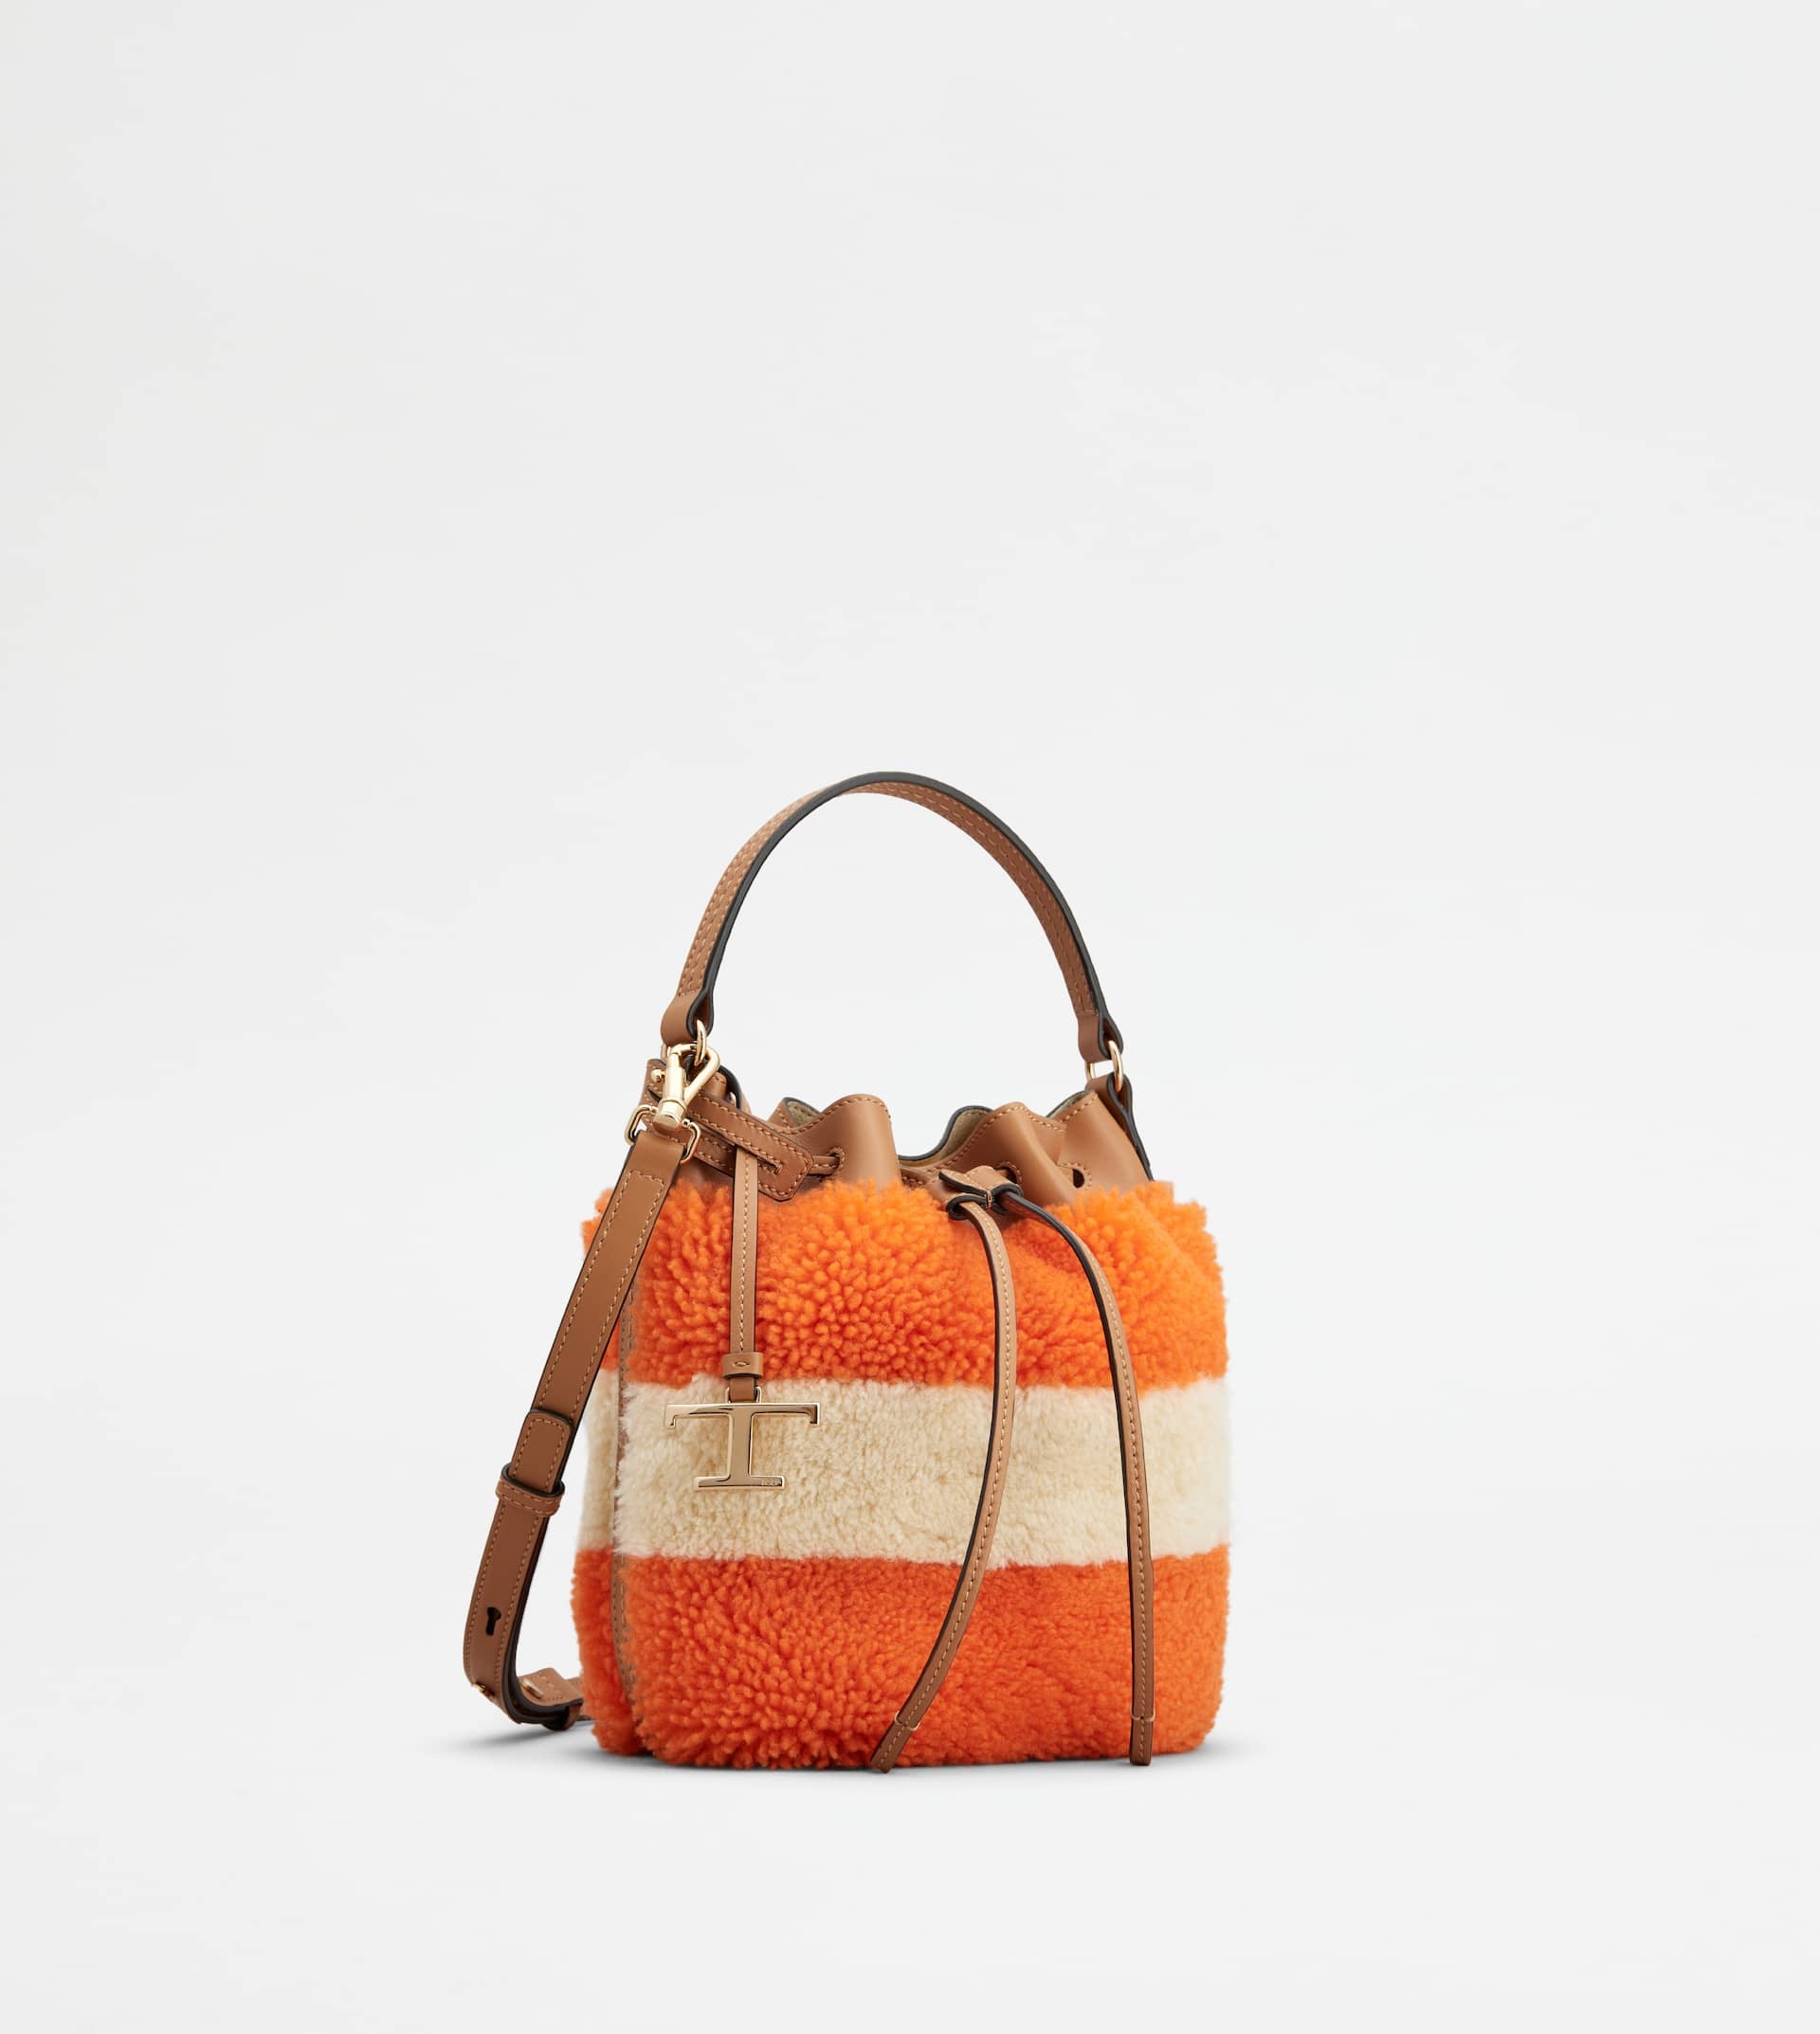 BUCKET BAG IN SHEEPSKIN AND LEATHER MICRO - ORANGE, OFF WHITE, BROWN - 4